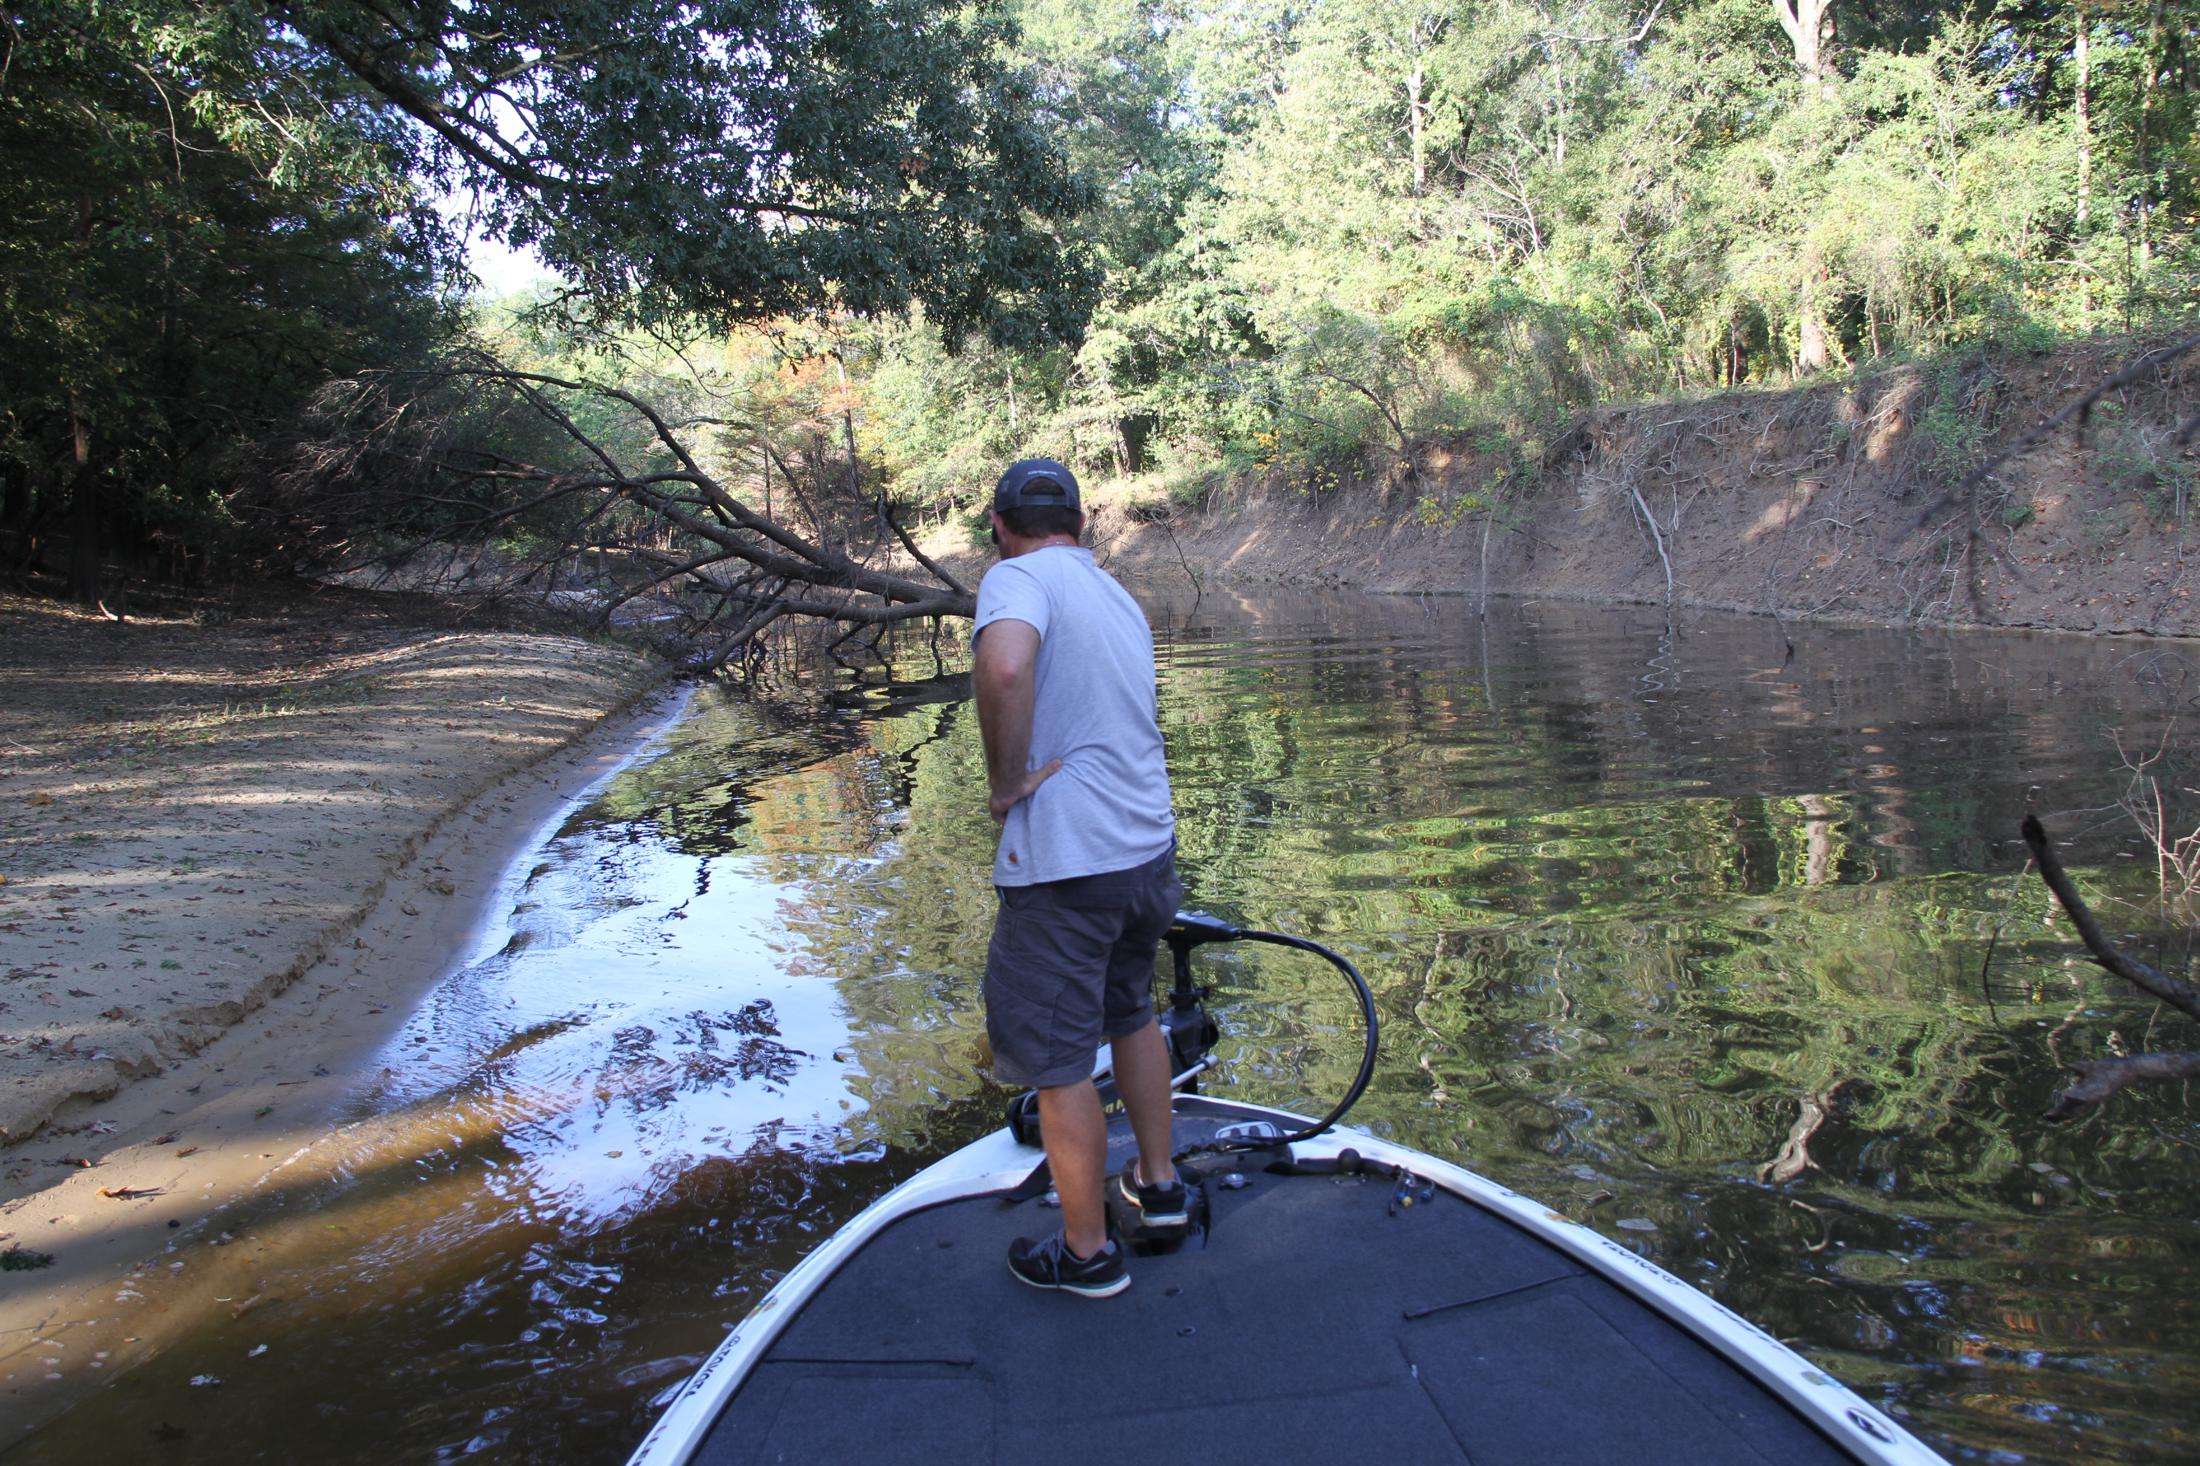 As Preuett and I continued up the bayou, we had to avoid some large blowdowns and ultra-shallow water.